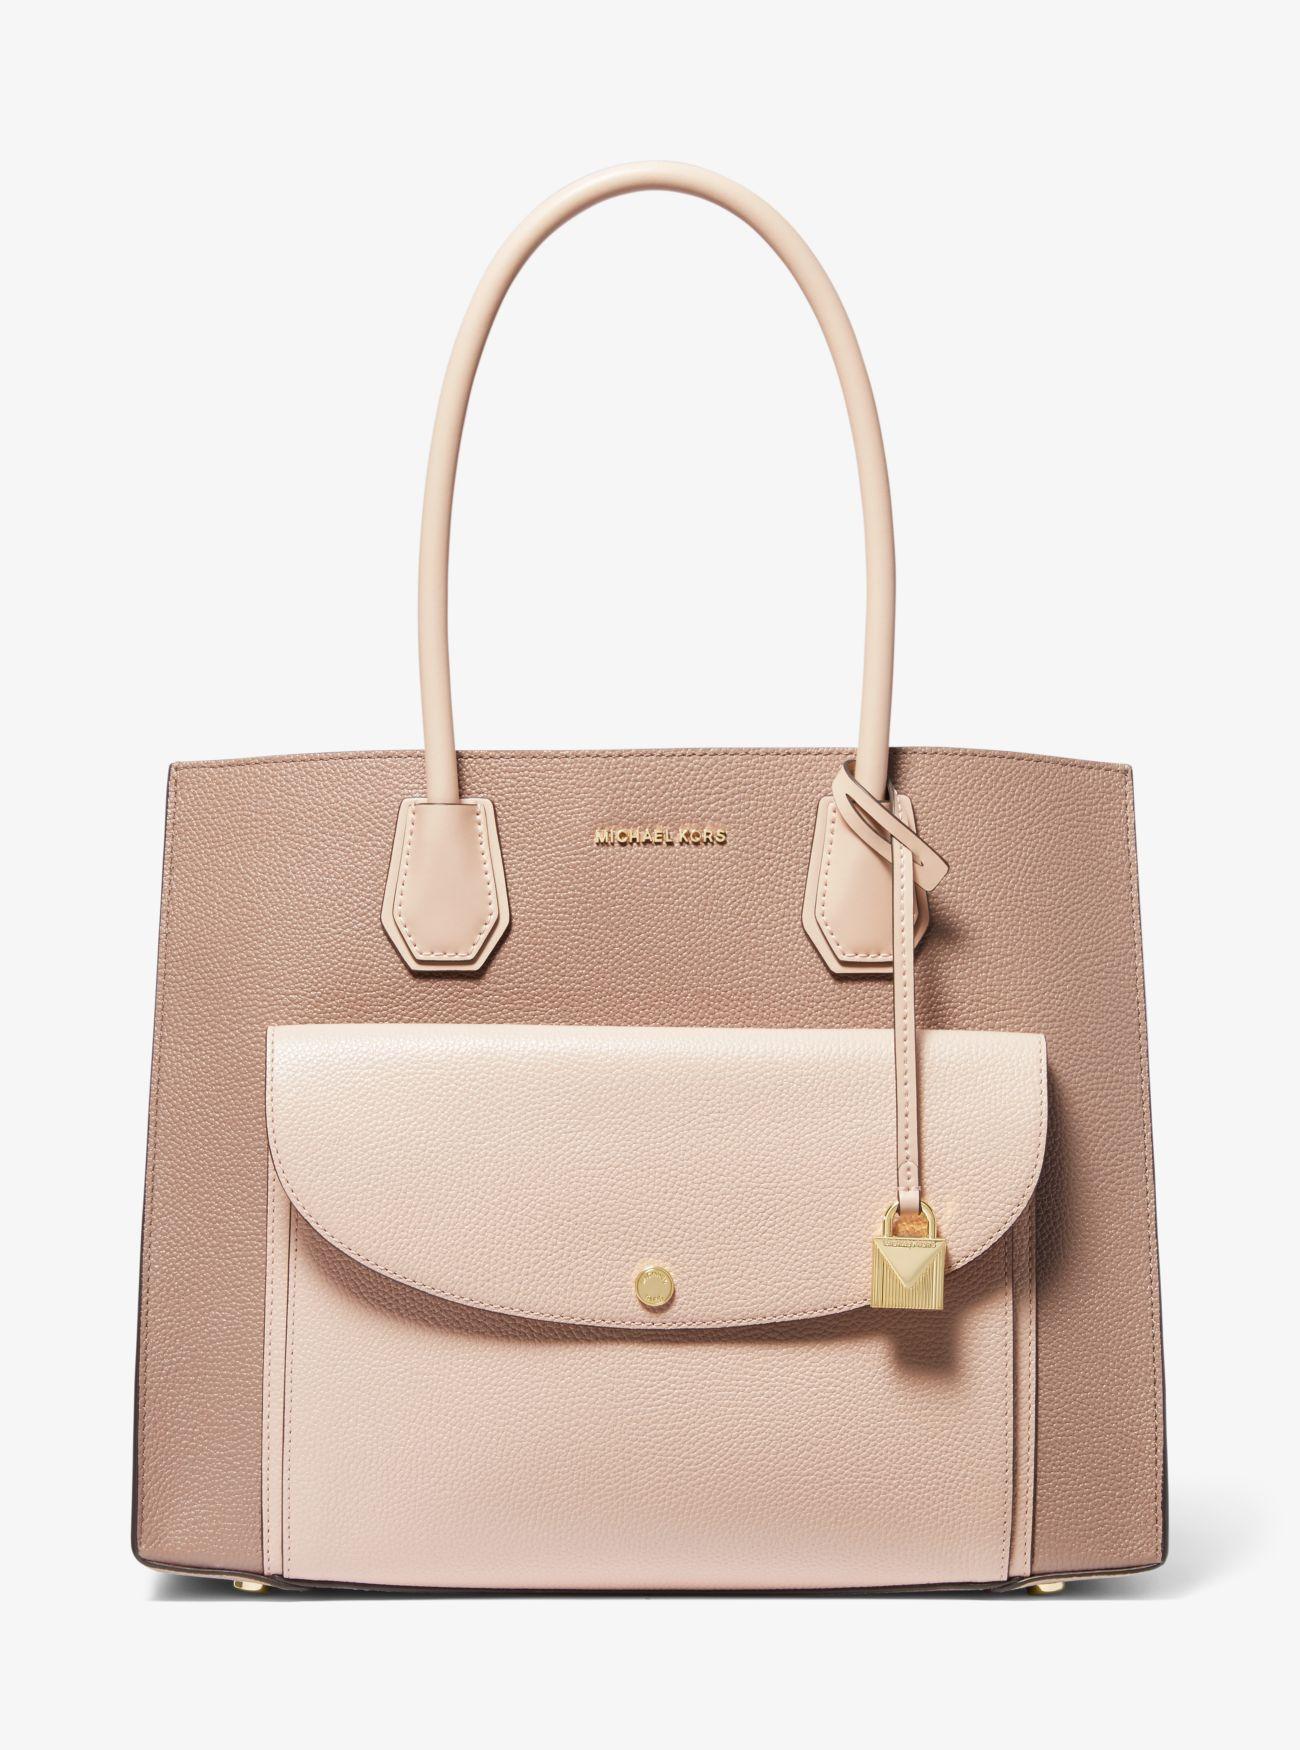 MICHAEL Michael Kors Mercer Extra-large Two-tone Pebbled Leather Pocket Tote Bag in Pink - Lyst